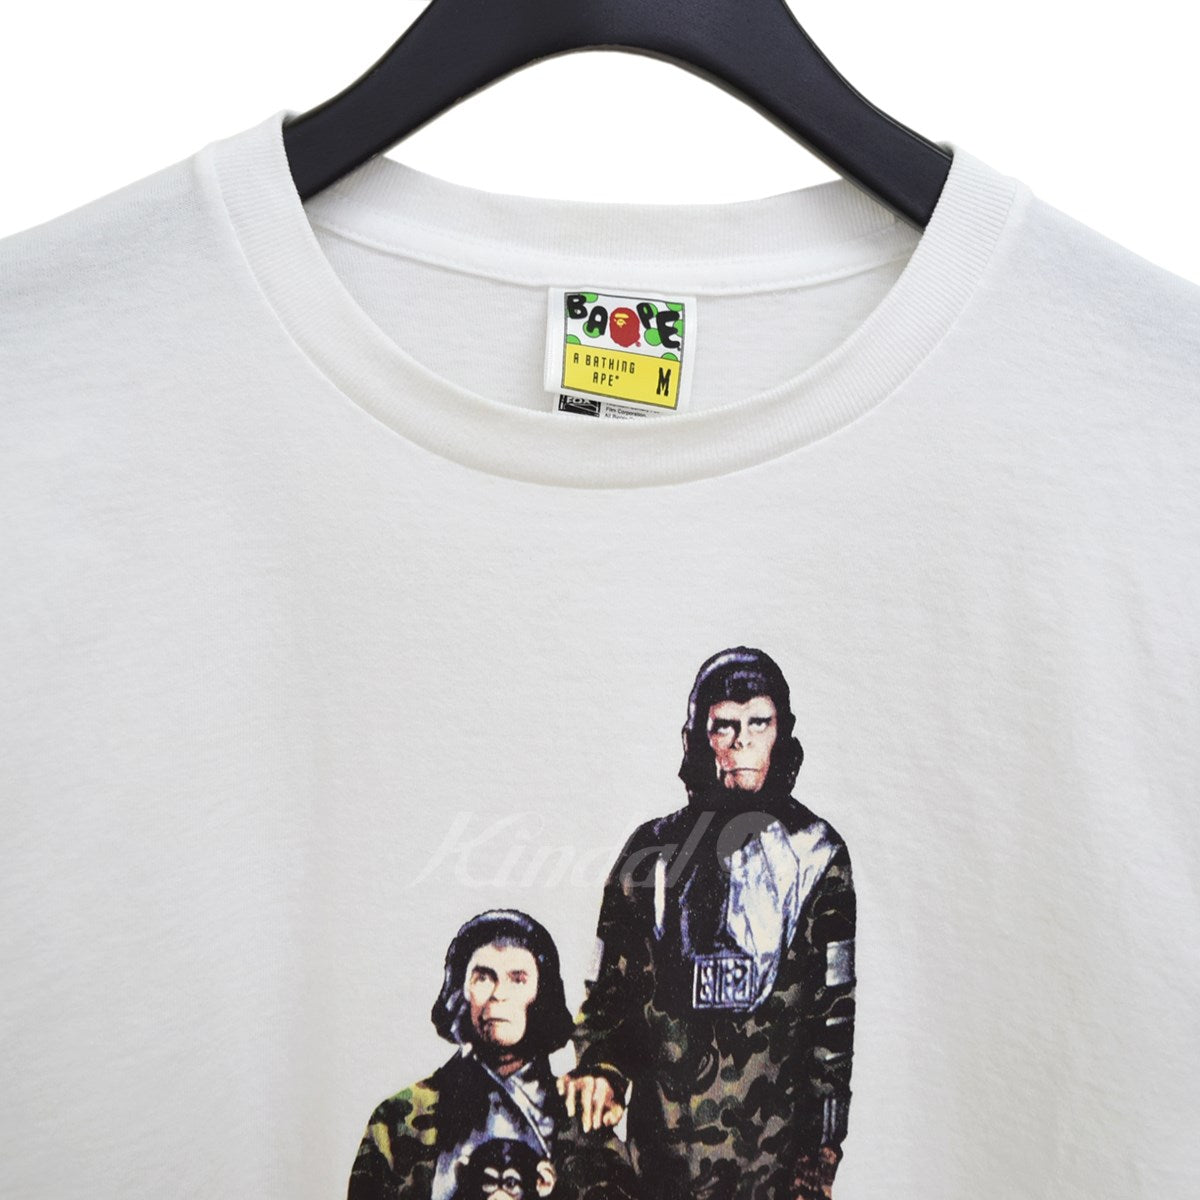 A BATHING APE(アベイシングエイプ) A PLANET OF THE APES Tee 猿の 